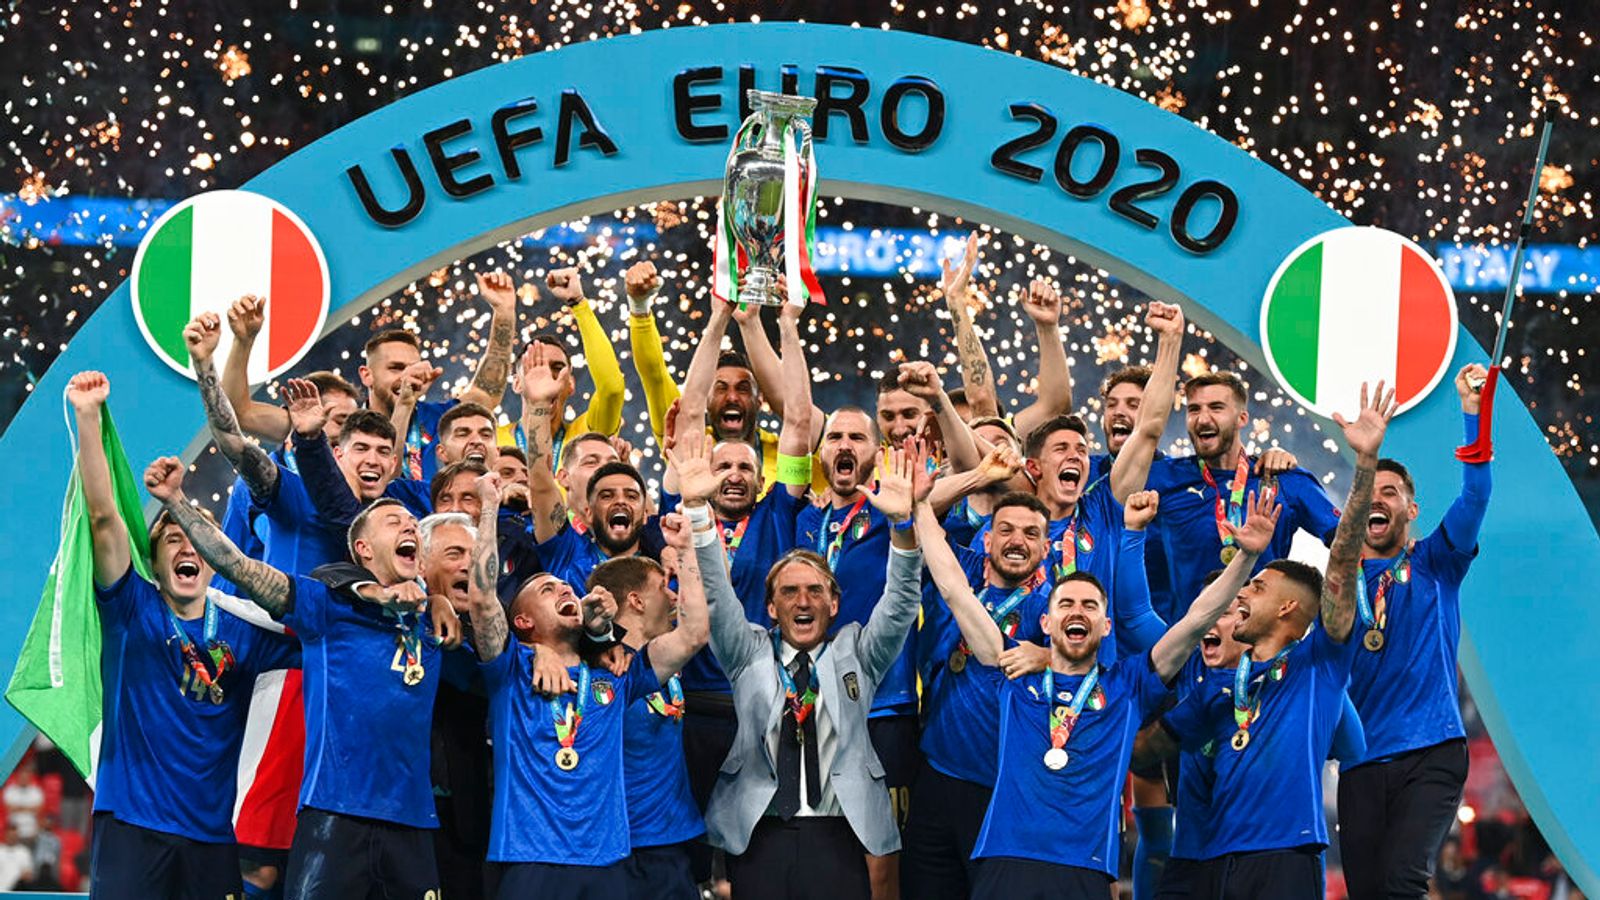 UEFA decides against expansion of Euros football tournament from 24 teams to 32 – for now